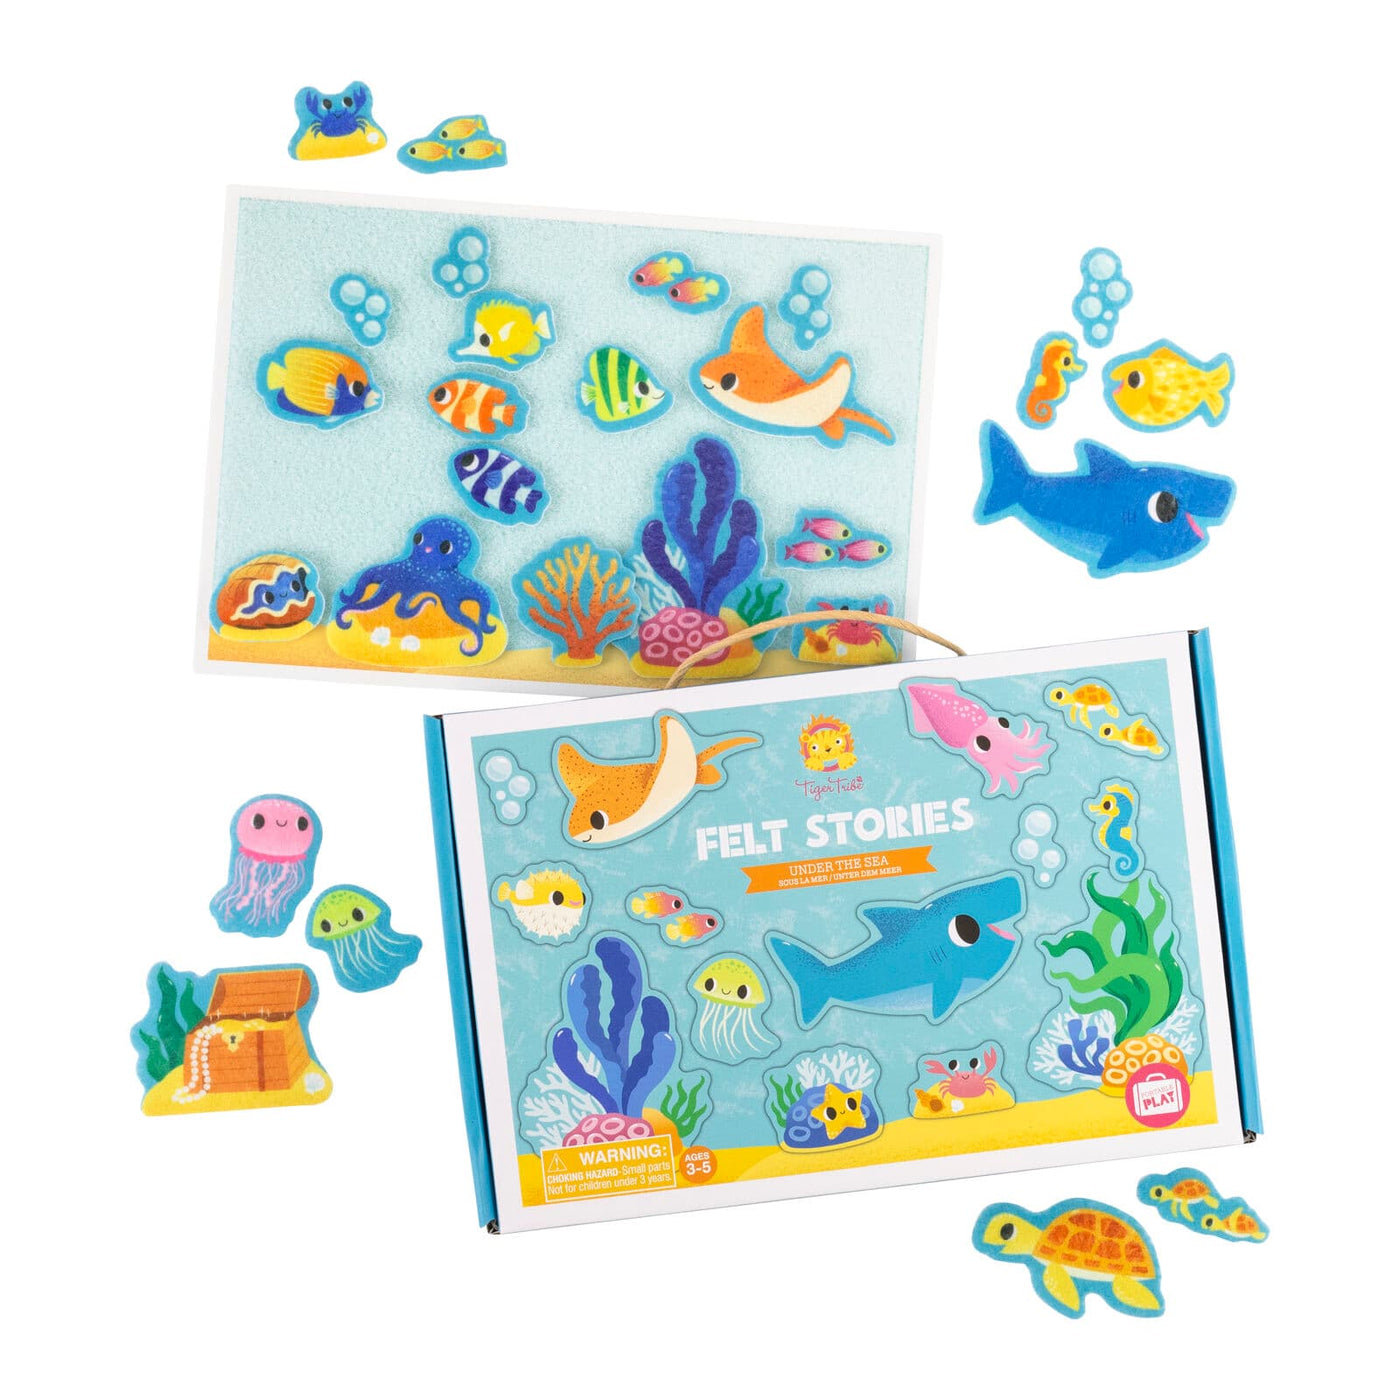 Tiger Tribe Felt Stories Under The Sea contents